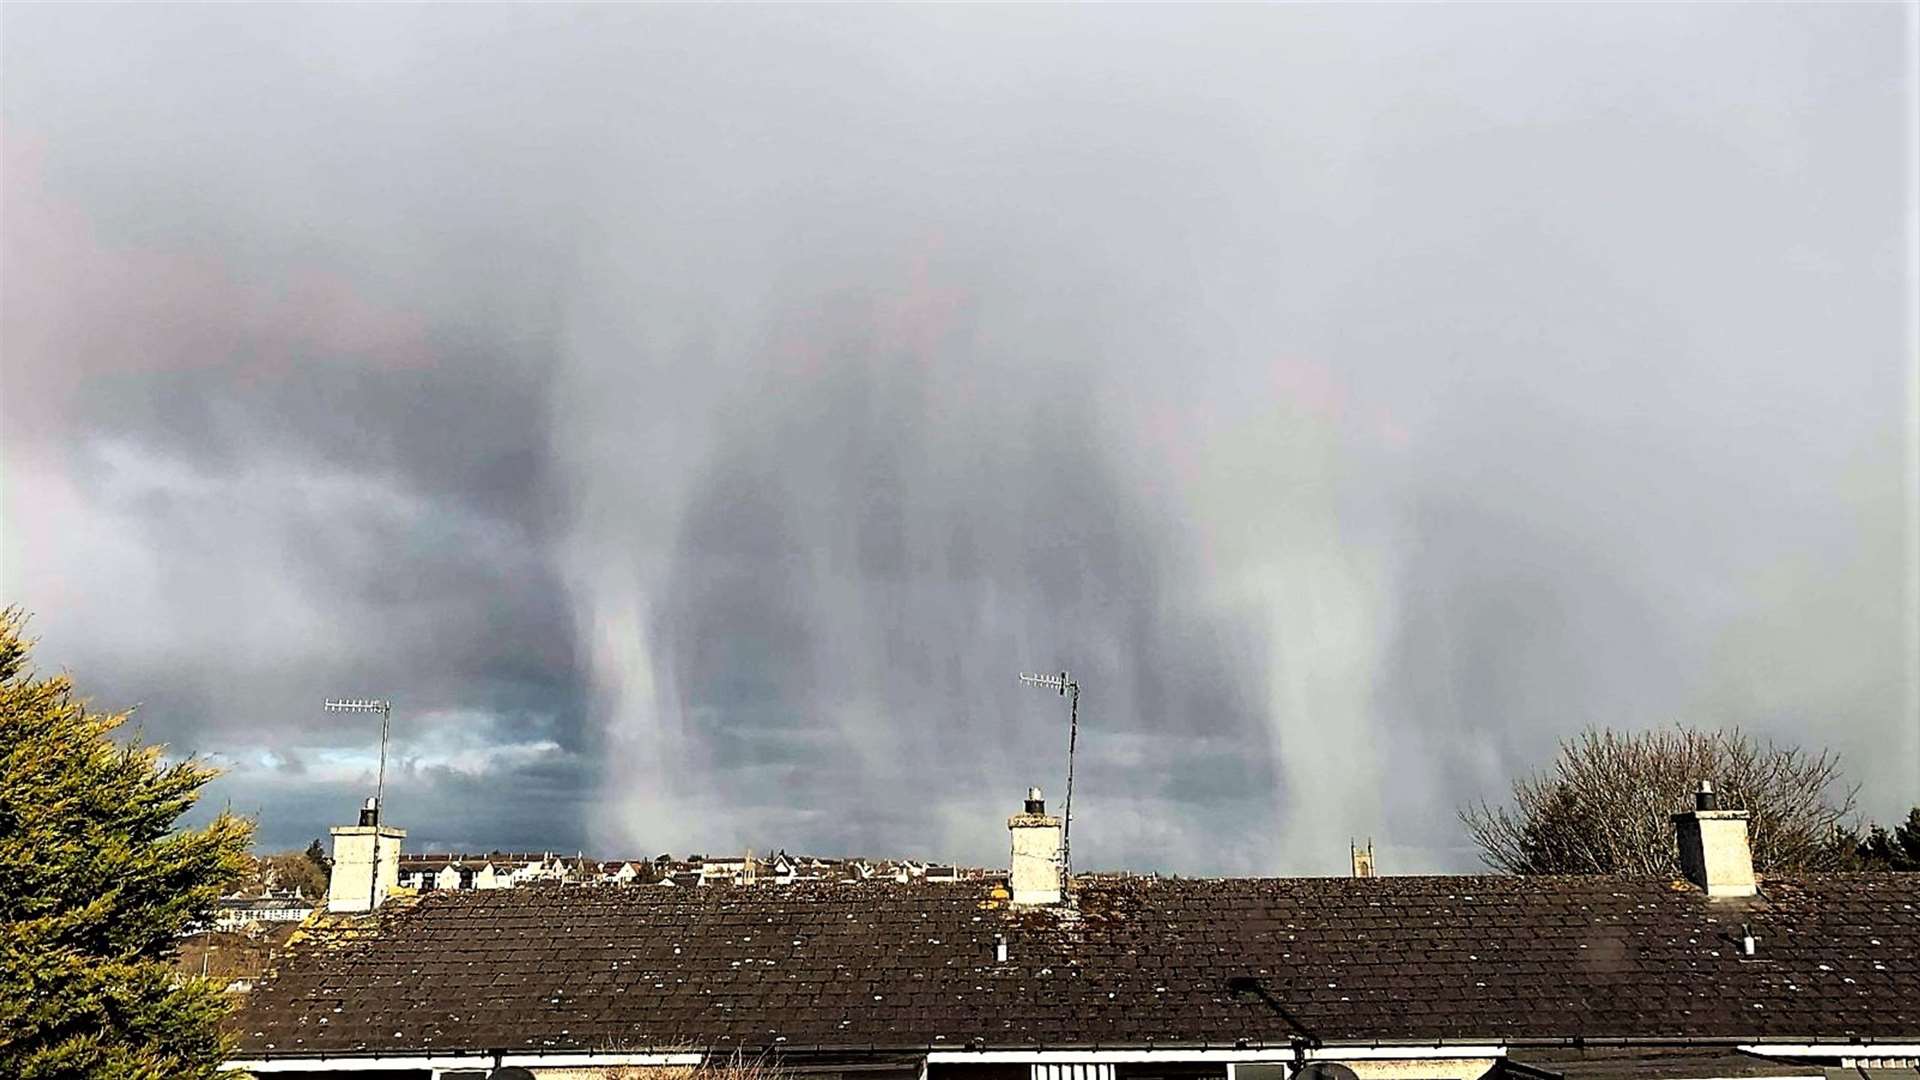 Virga, falling from the base of an active Cumuliform cloud, Thurso, April 12. Virga are streaks of precipitation; ice crystals or water droplets that trail below the base of a cloud, but evaporate before they reach the ground. Picture: Paul Cannop